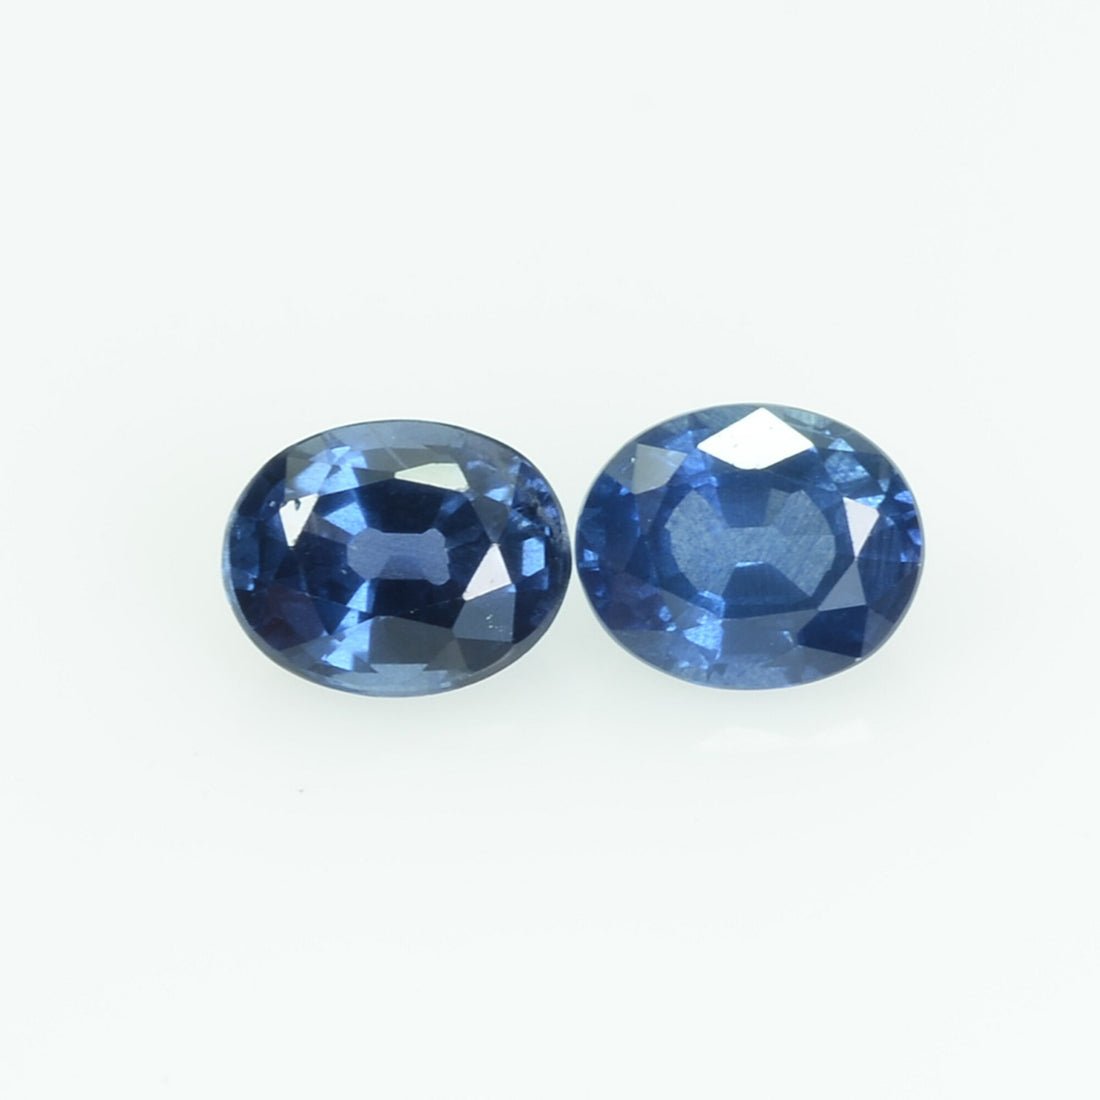 0.80 Cts Natural Blue Sapphire Loose Pair Gemstone Oval Cut